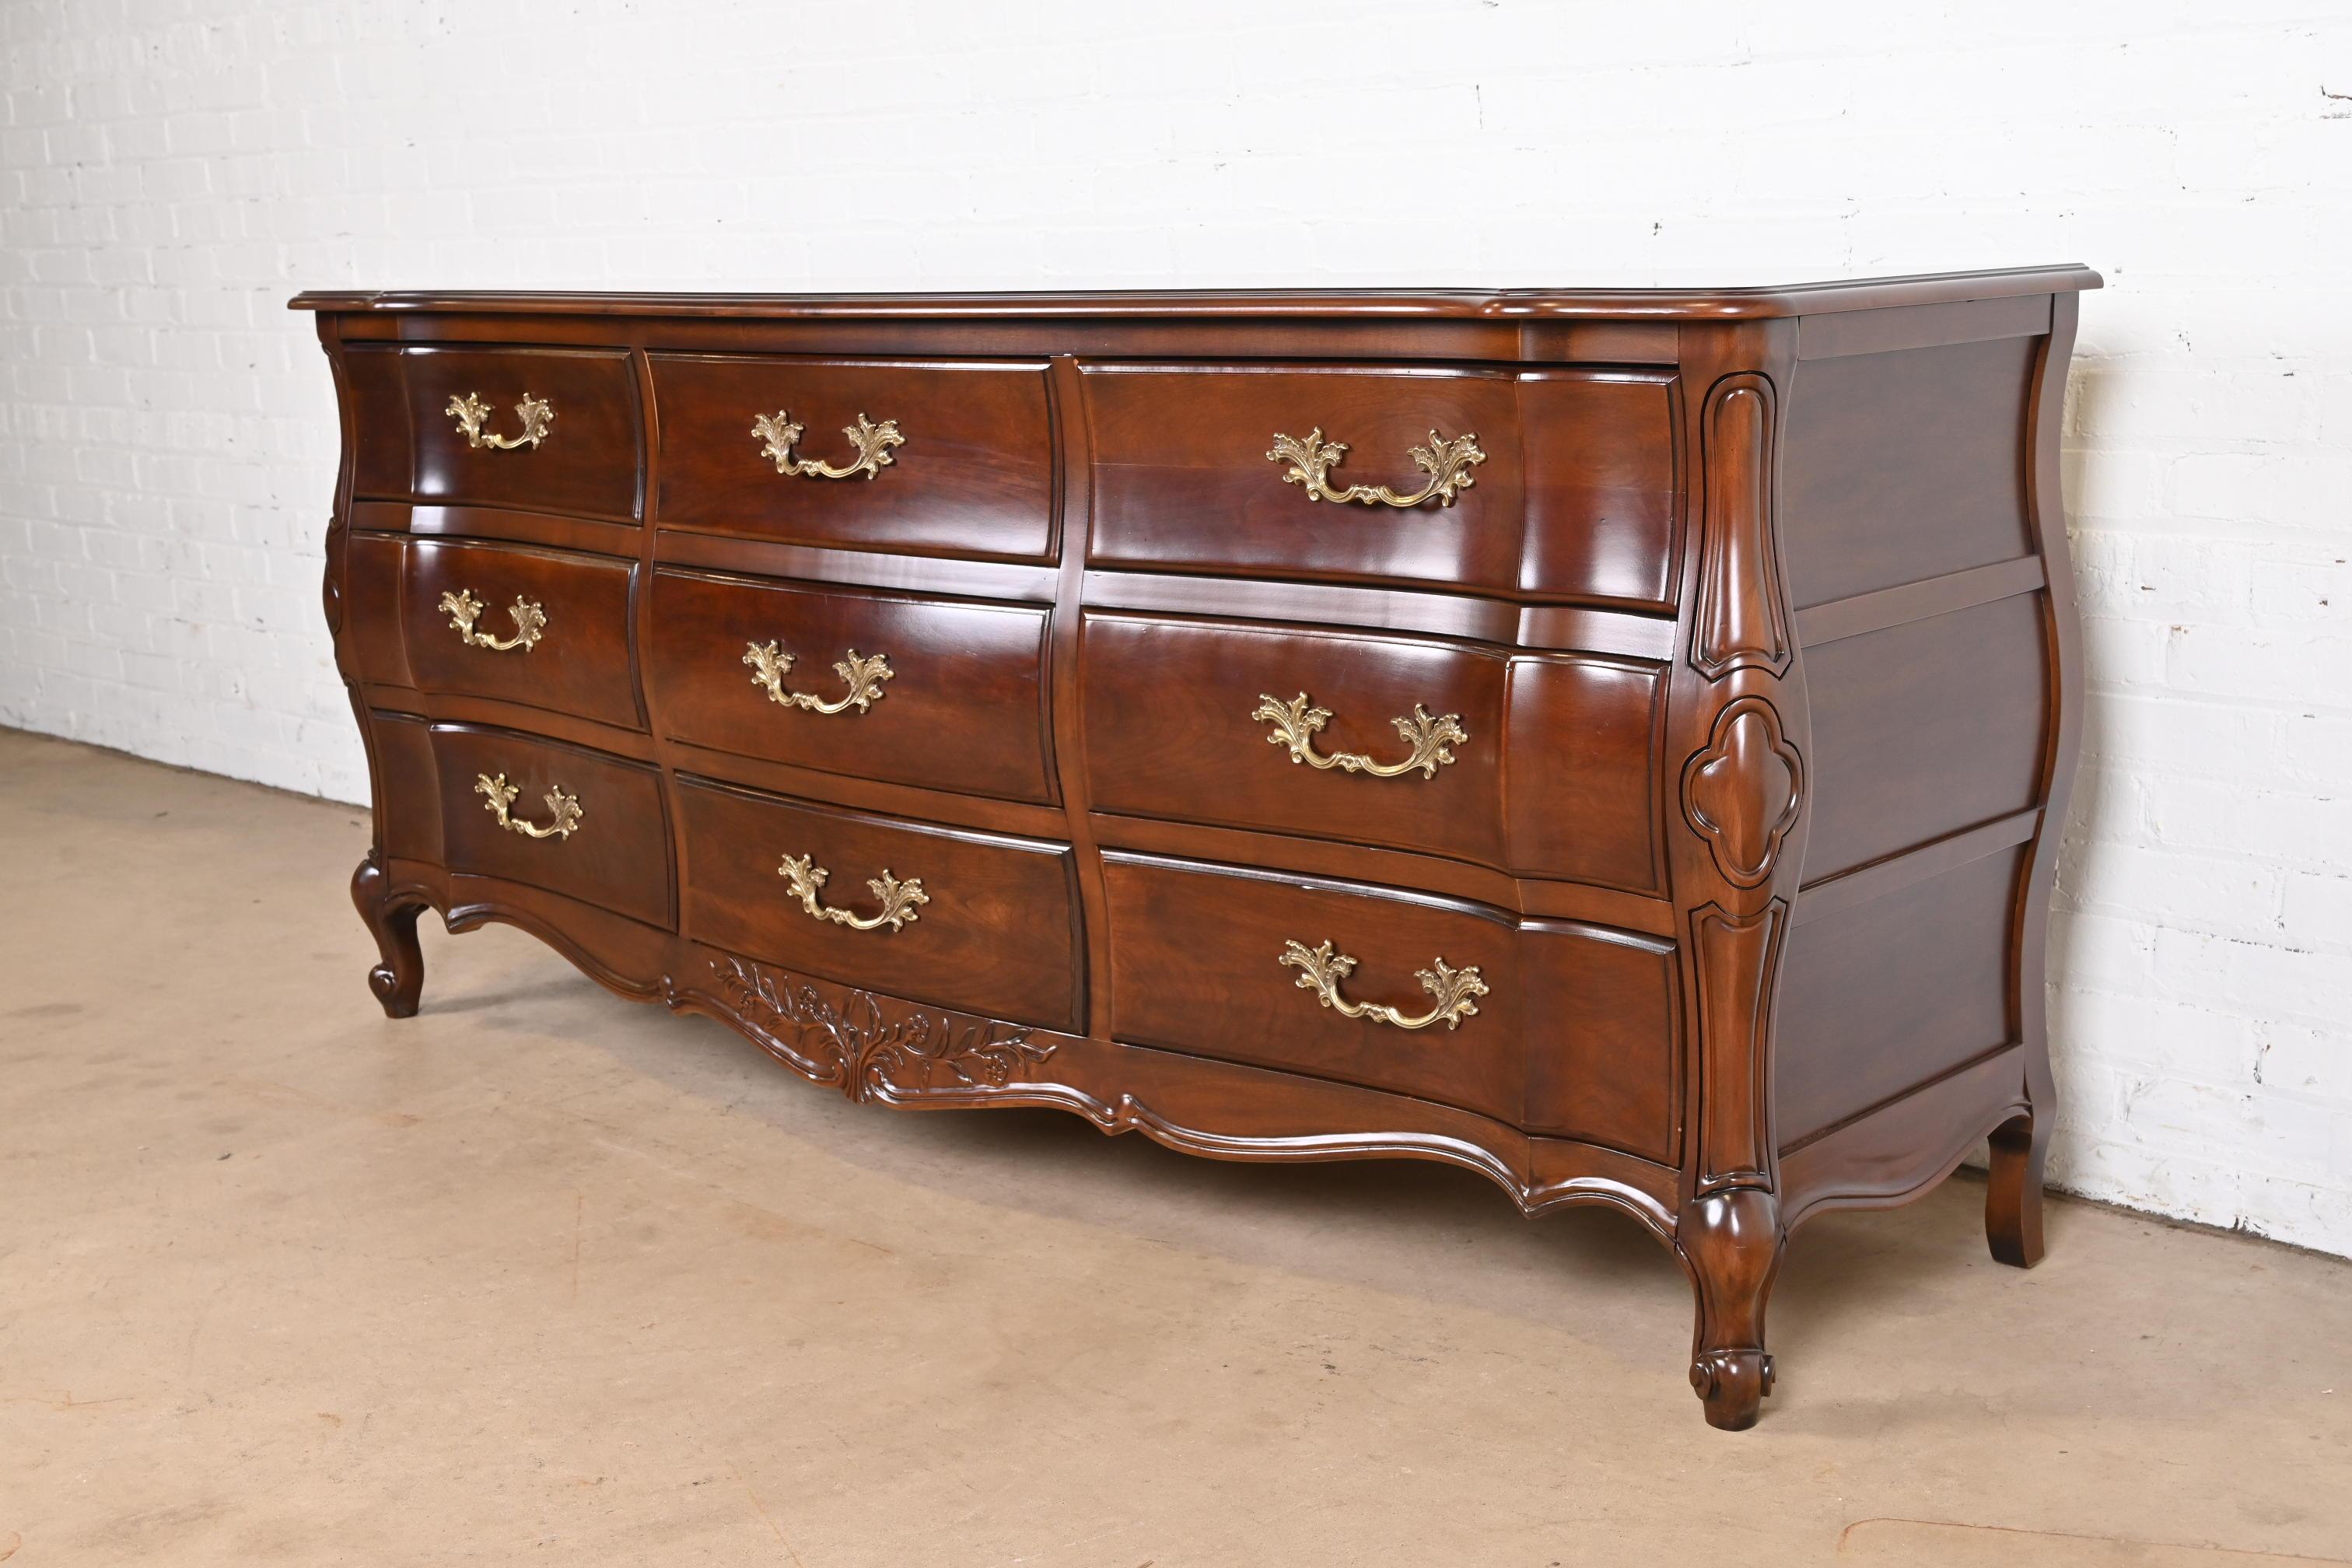 French Provincial Louis XV Cherry Wood Dresser by White Furniture, Refinished In Good Condition For Sale In South Bend, IN